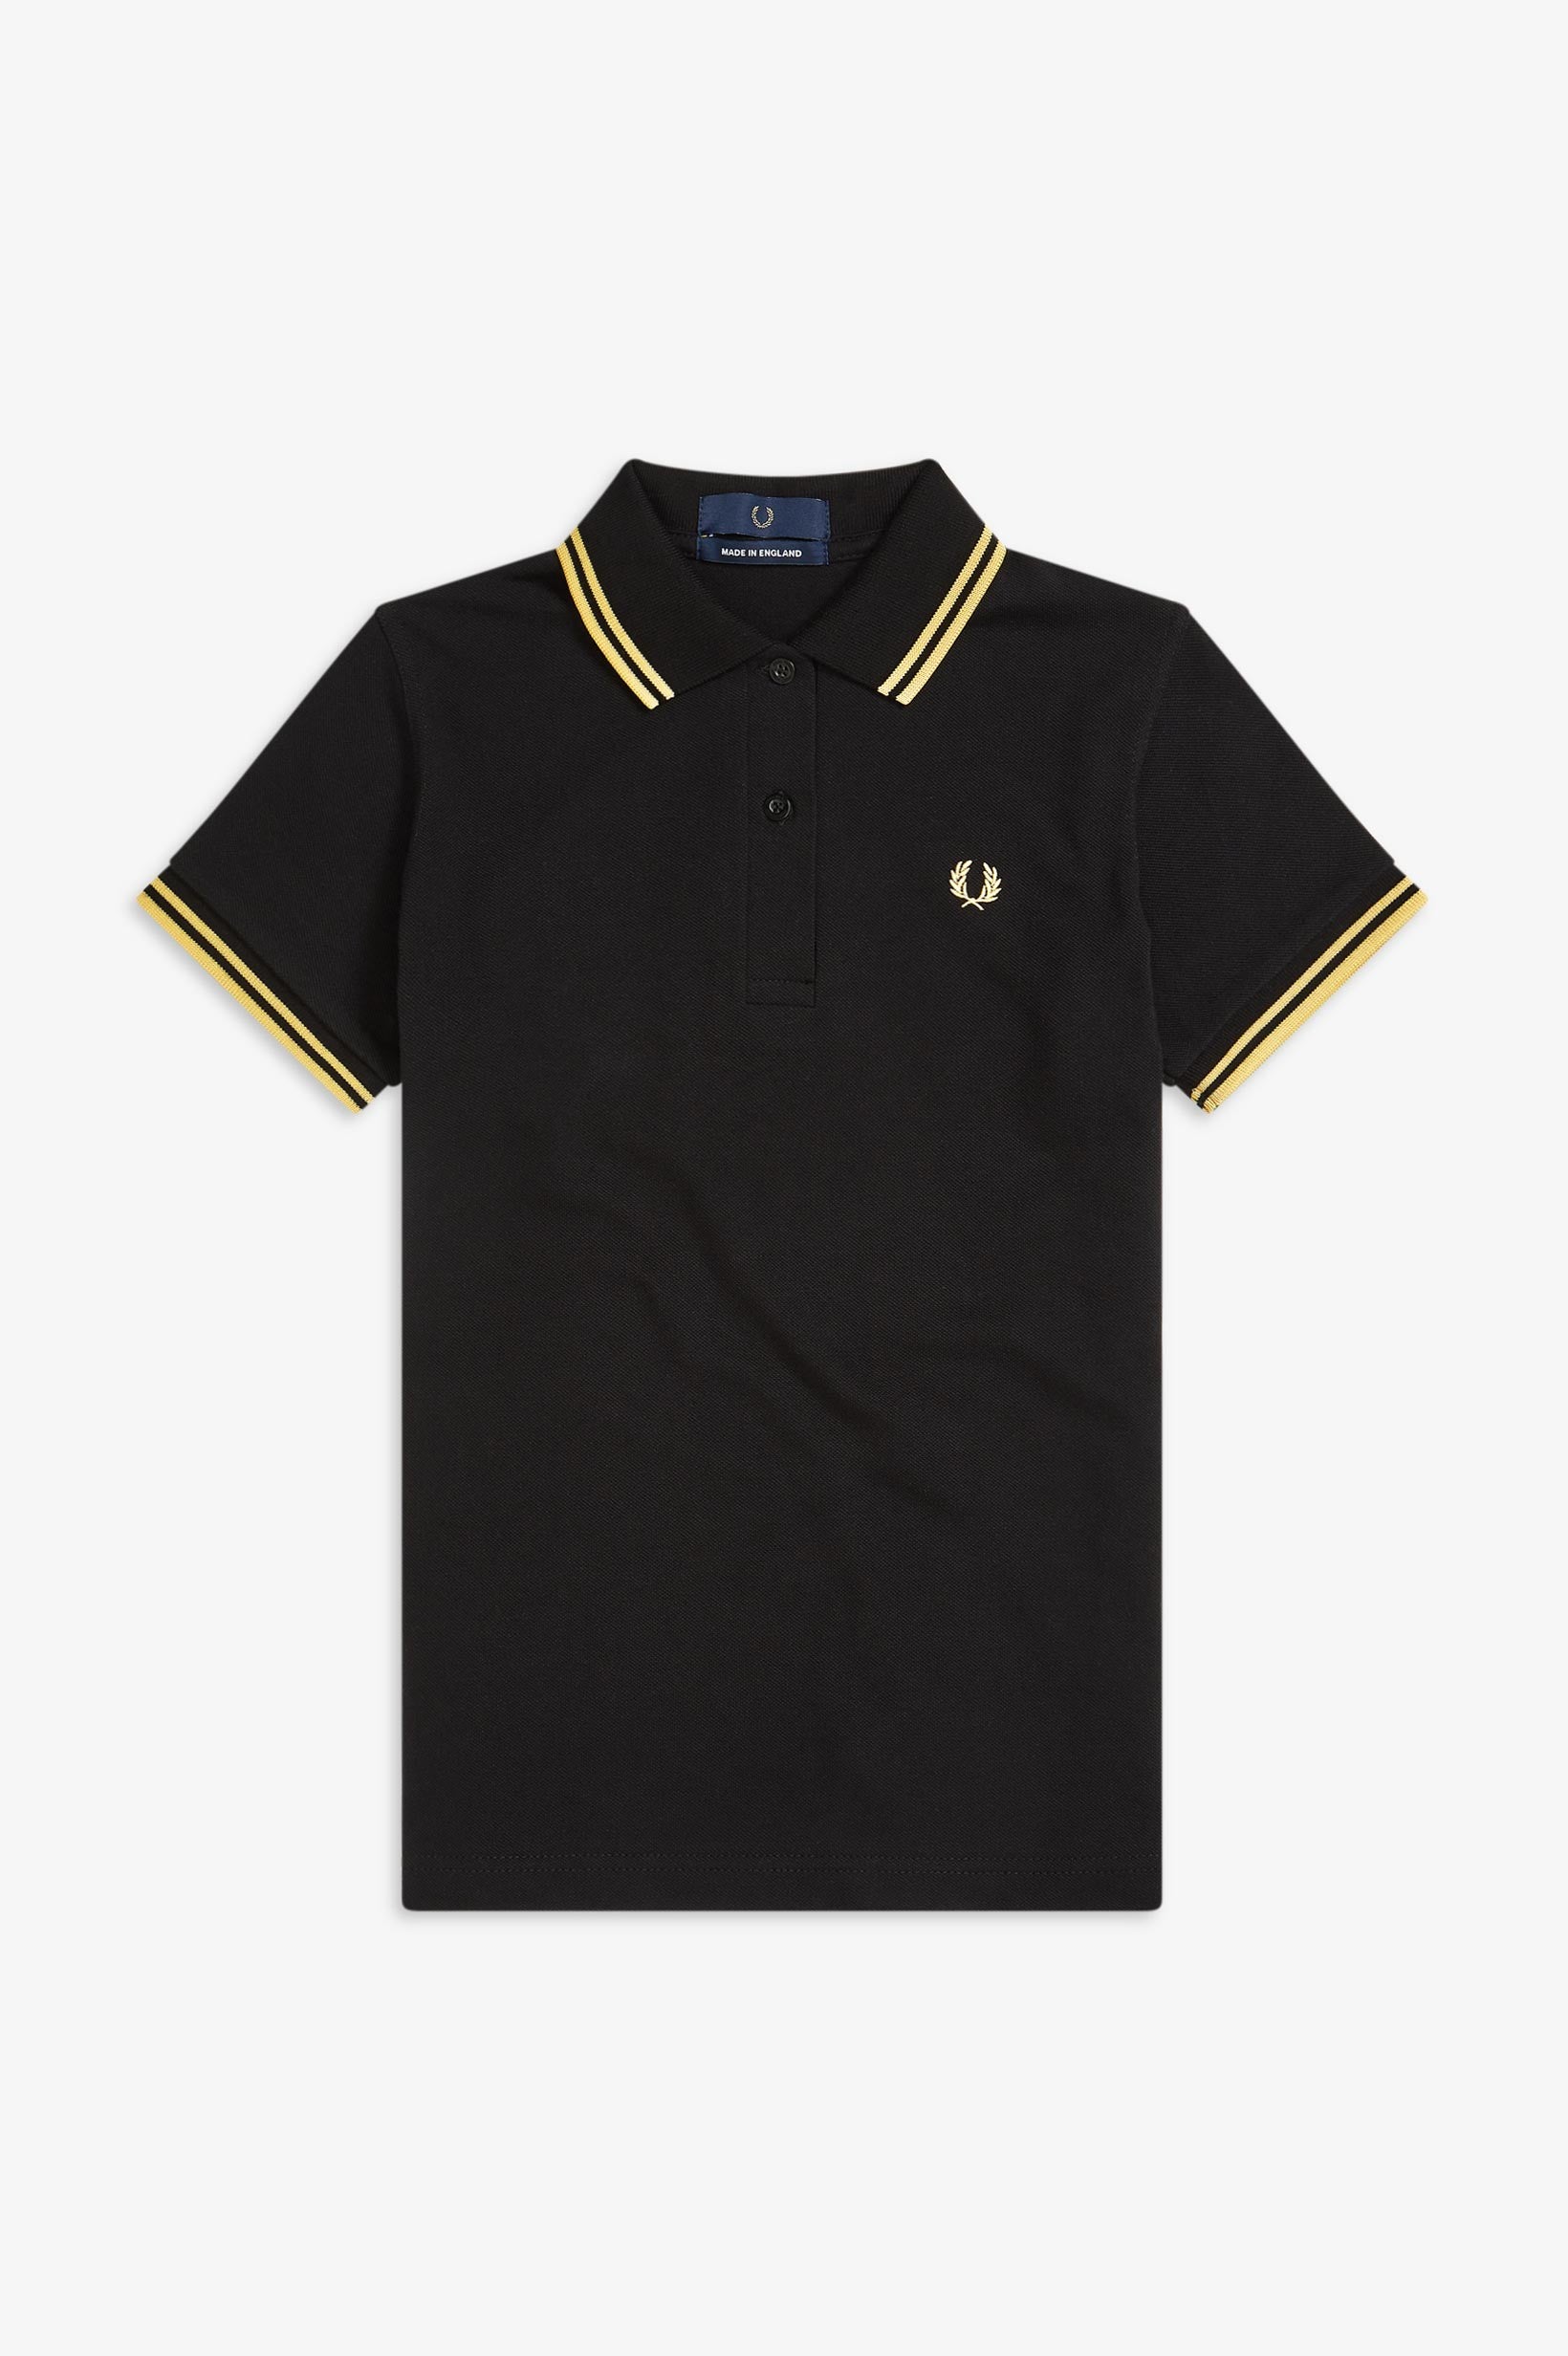 LADIES MADE IN ENGLAND FRED PERRY SHIRT (BLACK/CHAMPAGNE) – Posers